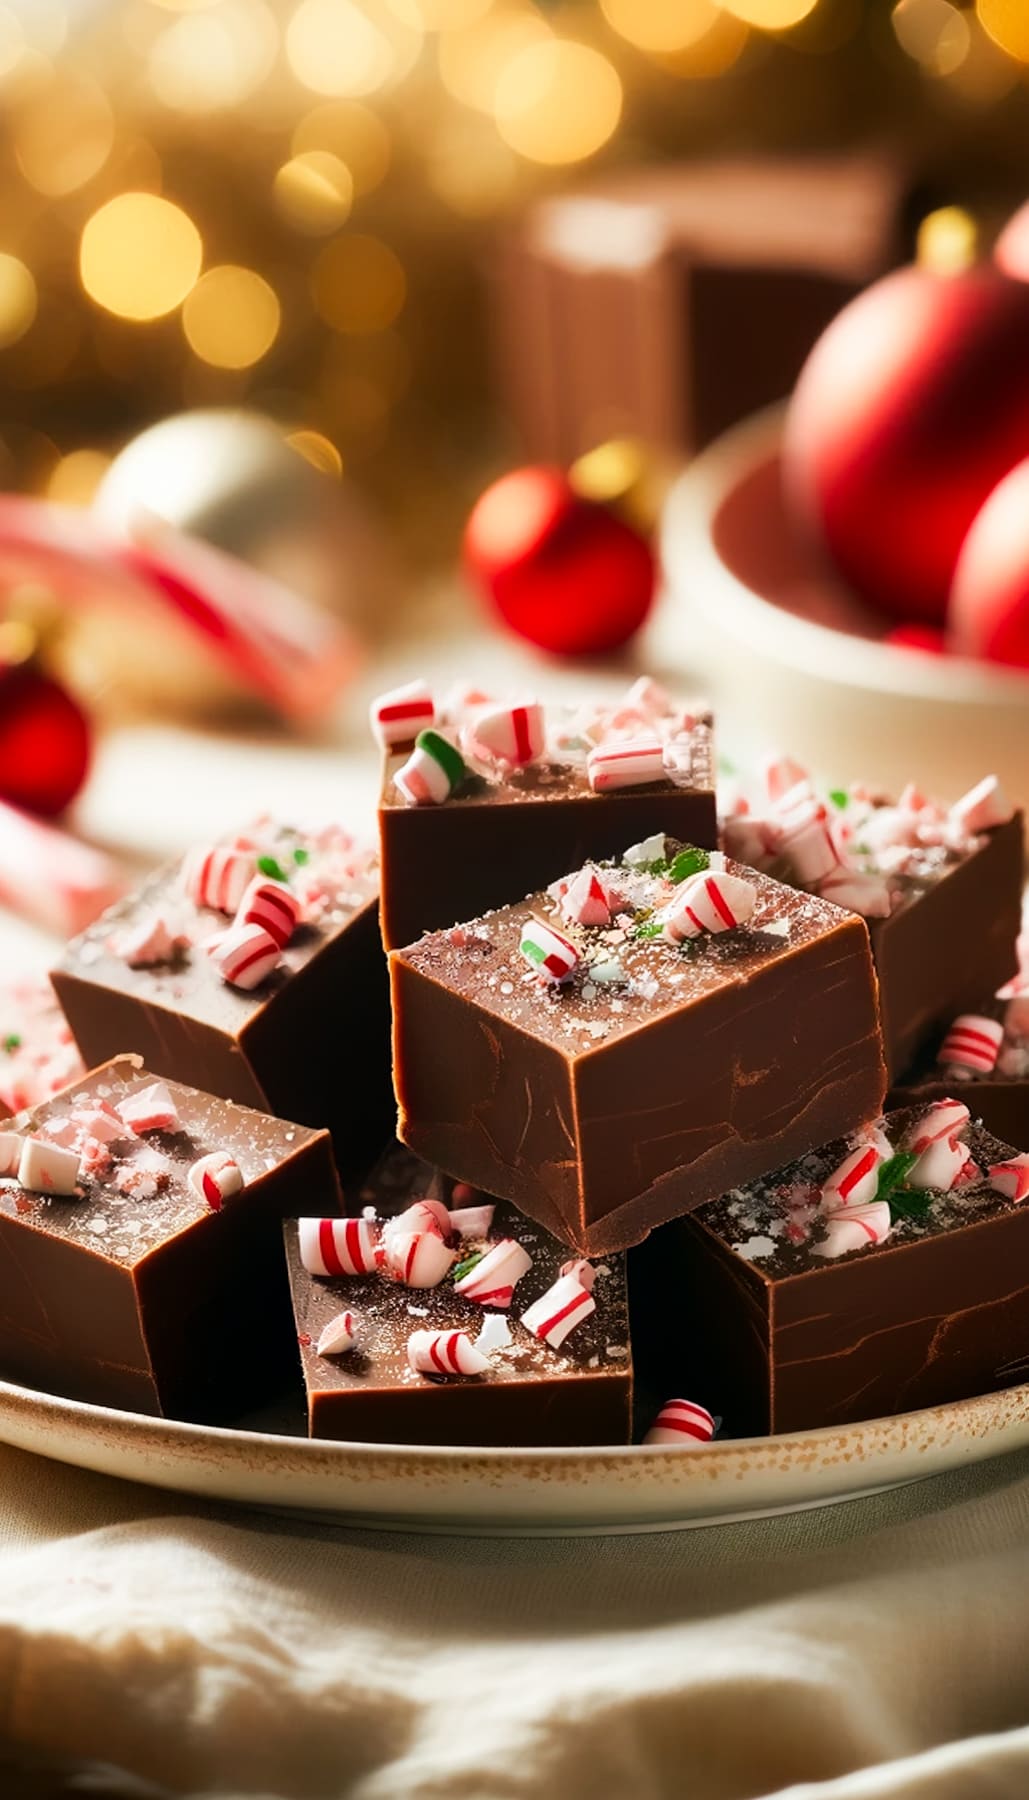 Image of peppermint mocha fudge squares arranged on a plate and surrounded with candy canes and other festive decor.